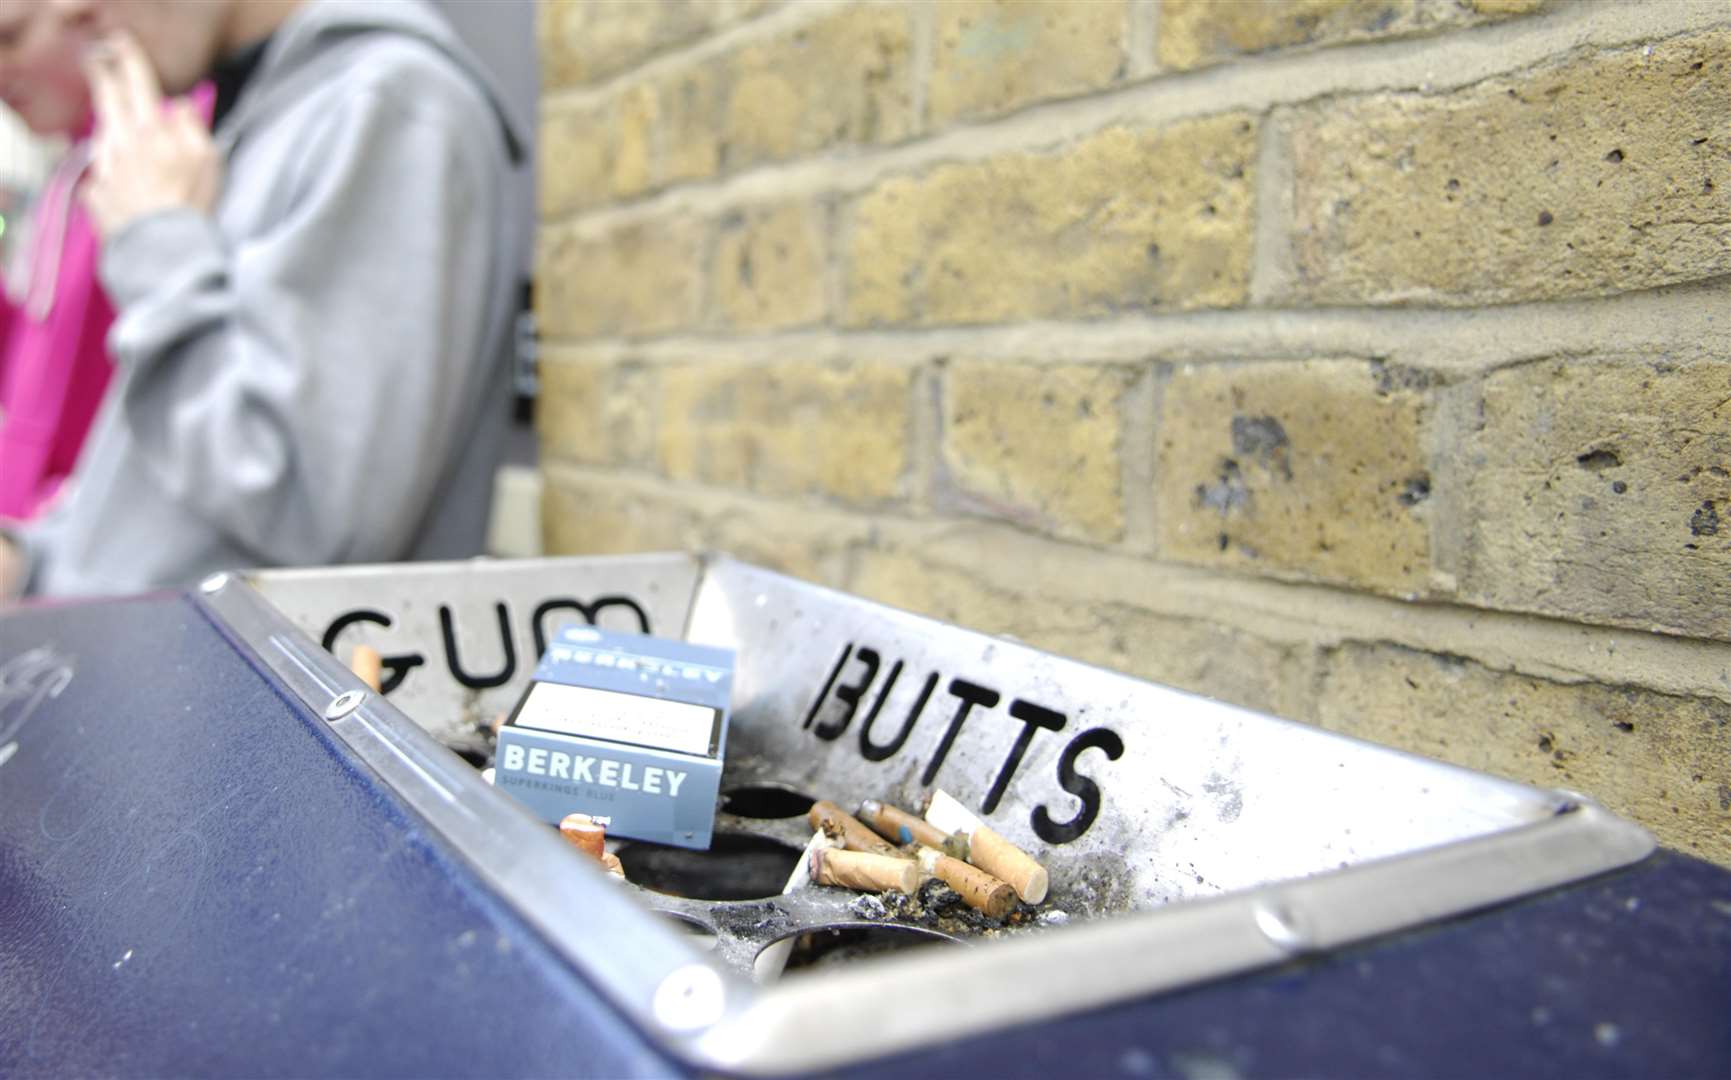 Smokers will get the chance to earn back some of their litter fine if they kick the habit. Picture: Martin Apps